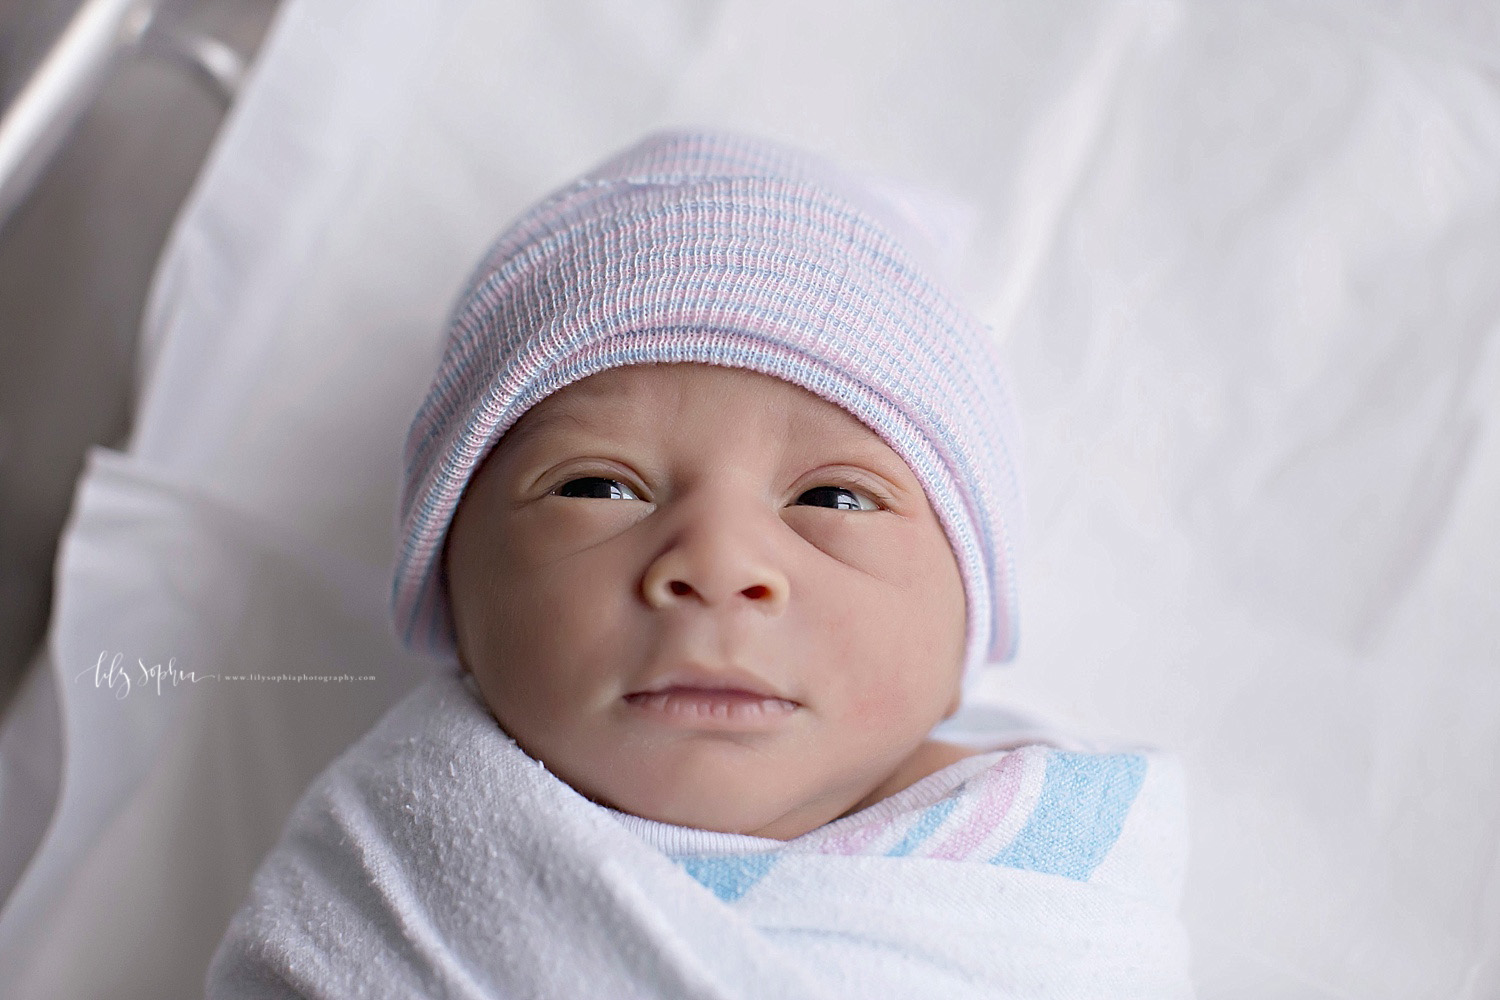  Image of an African American, infant, newborn, baby, boy with his eyes open, laying in his hospital bassinet.&nbsp; 